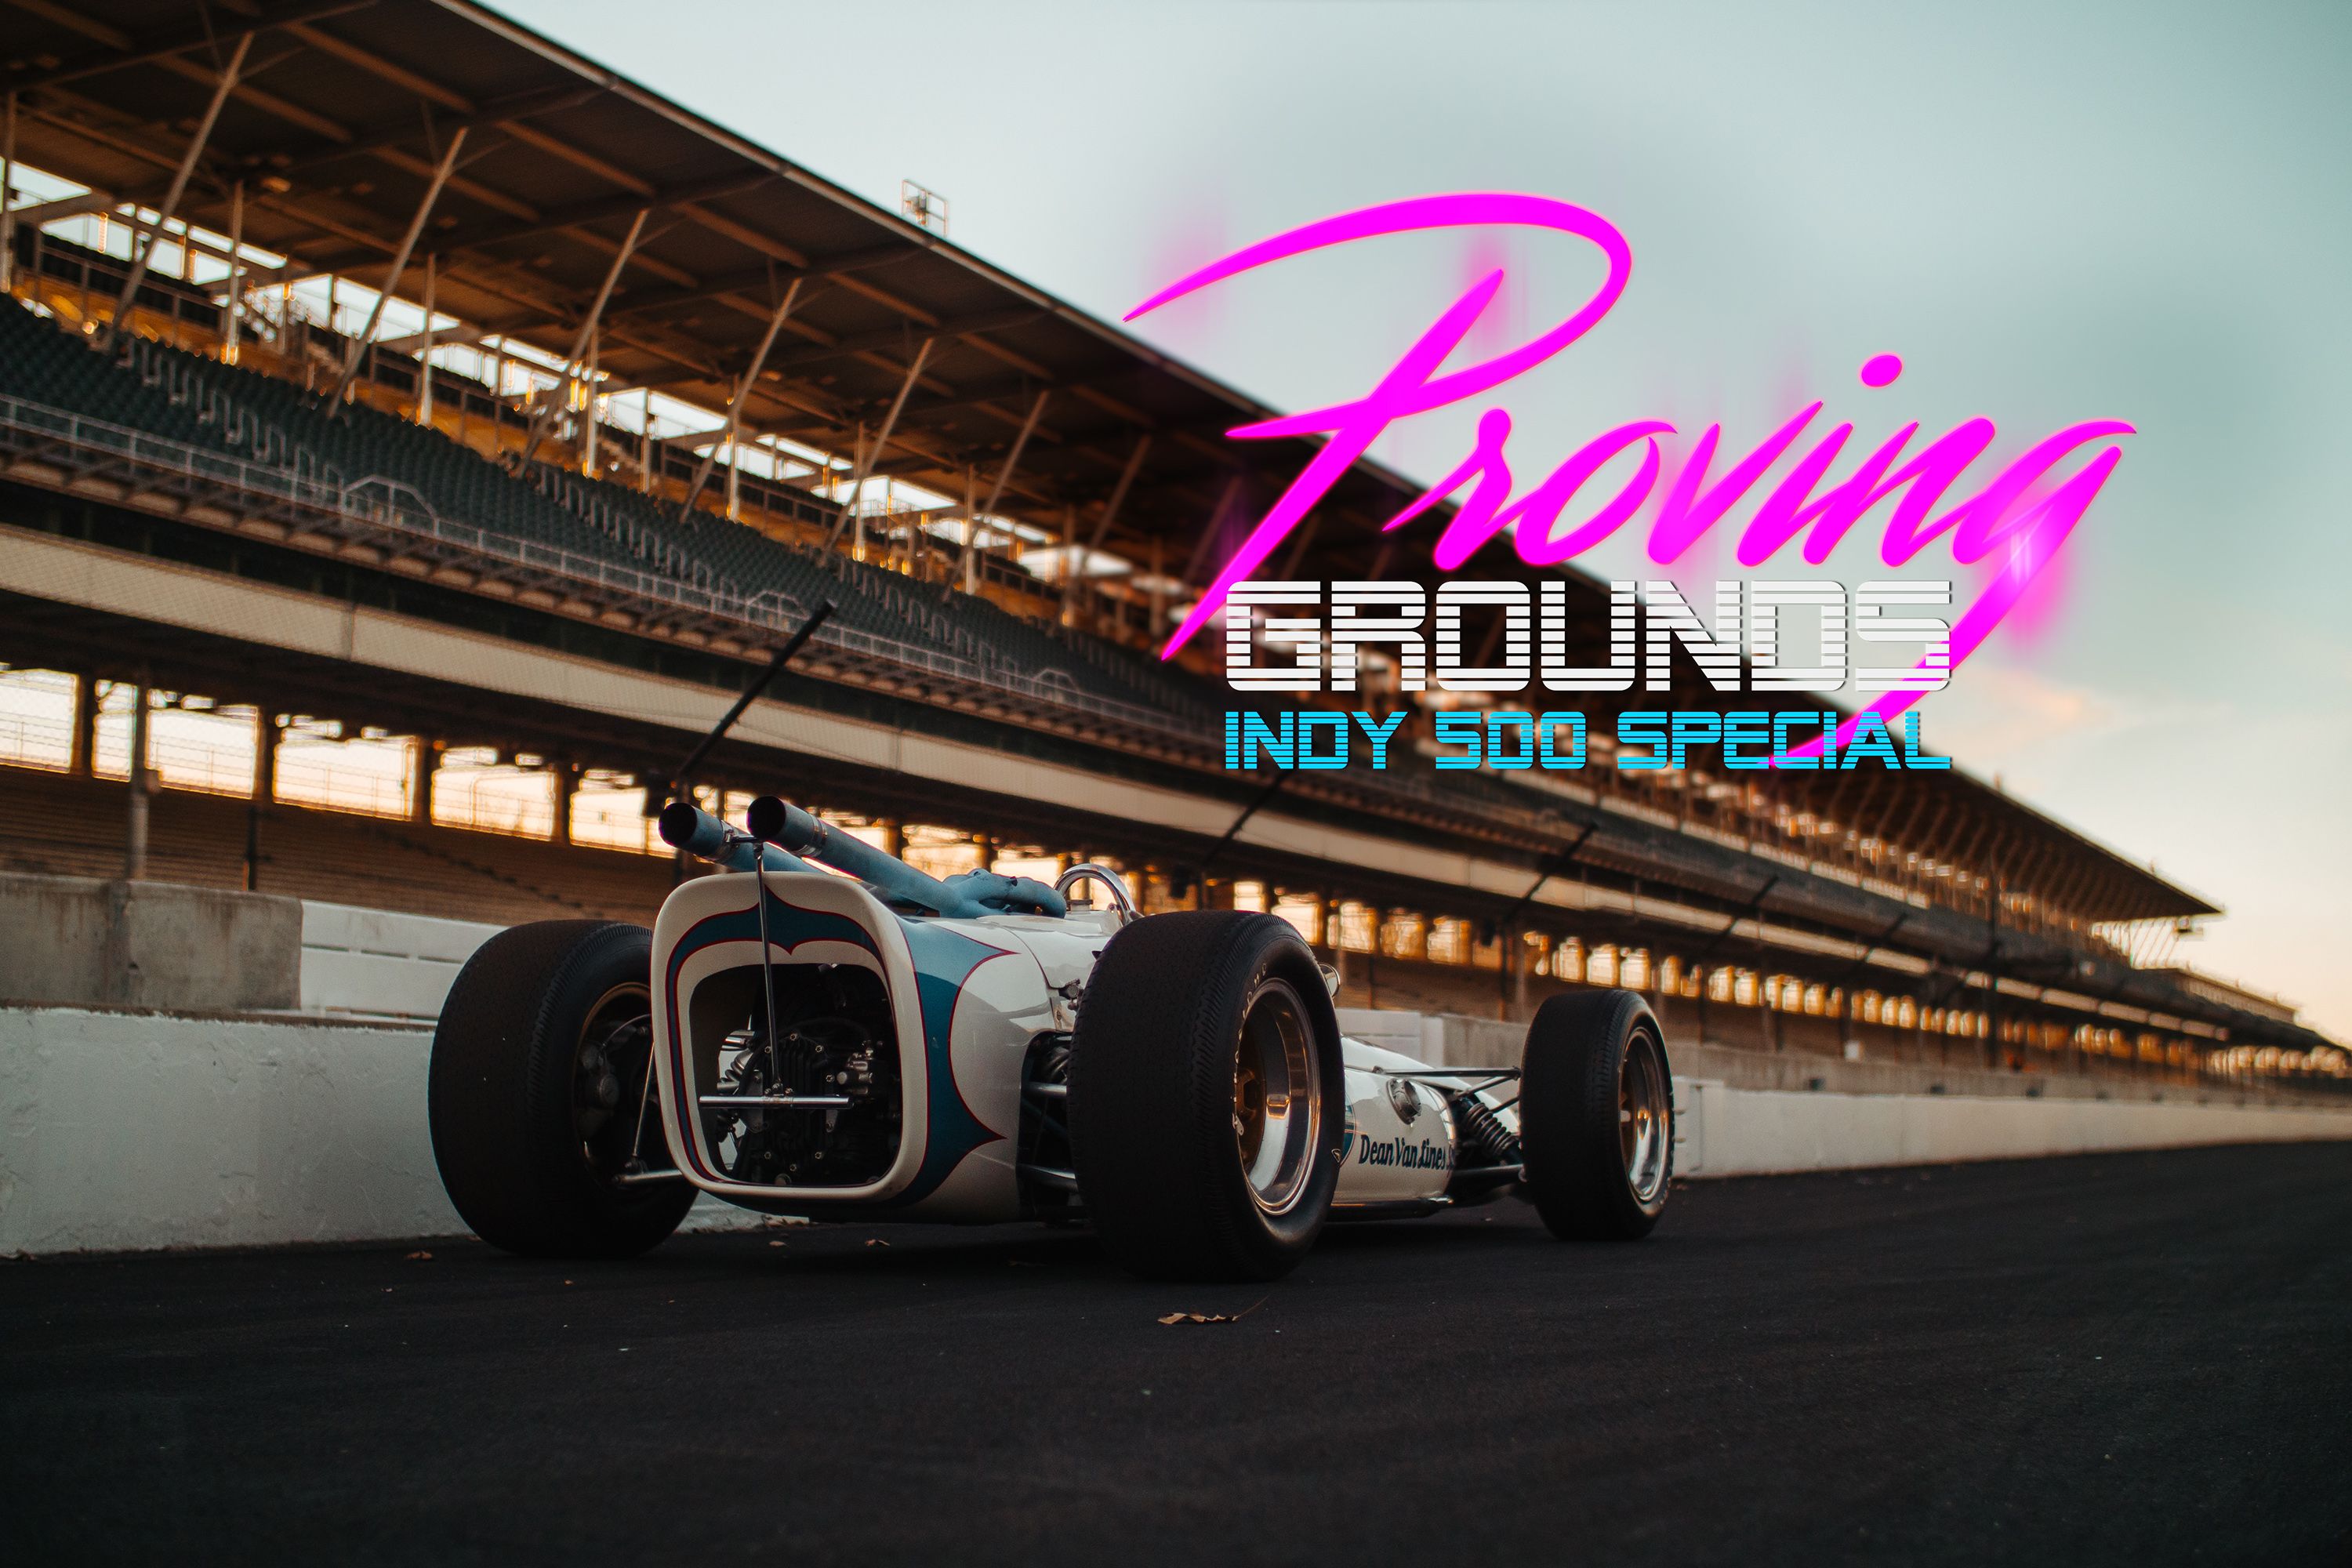 Flipboard: One of Our Favorite Car TV Shows Made an Indy 500 Special